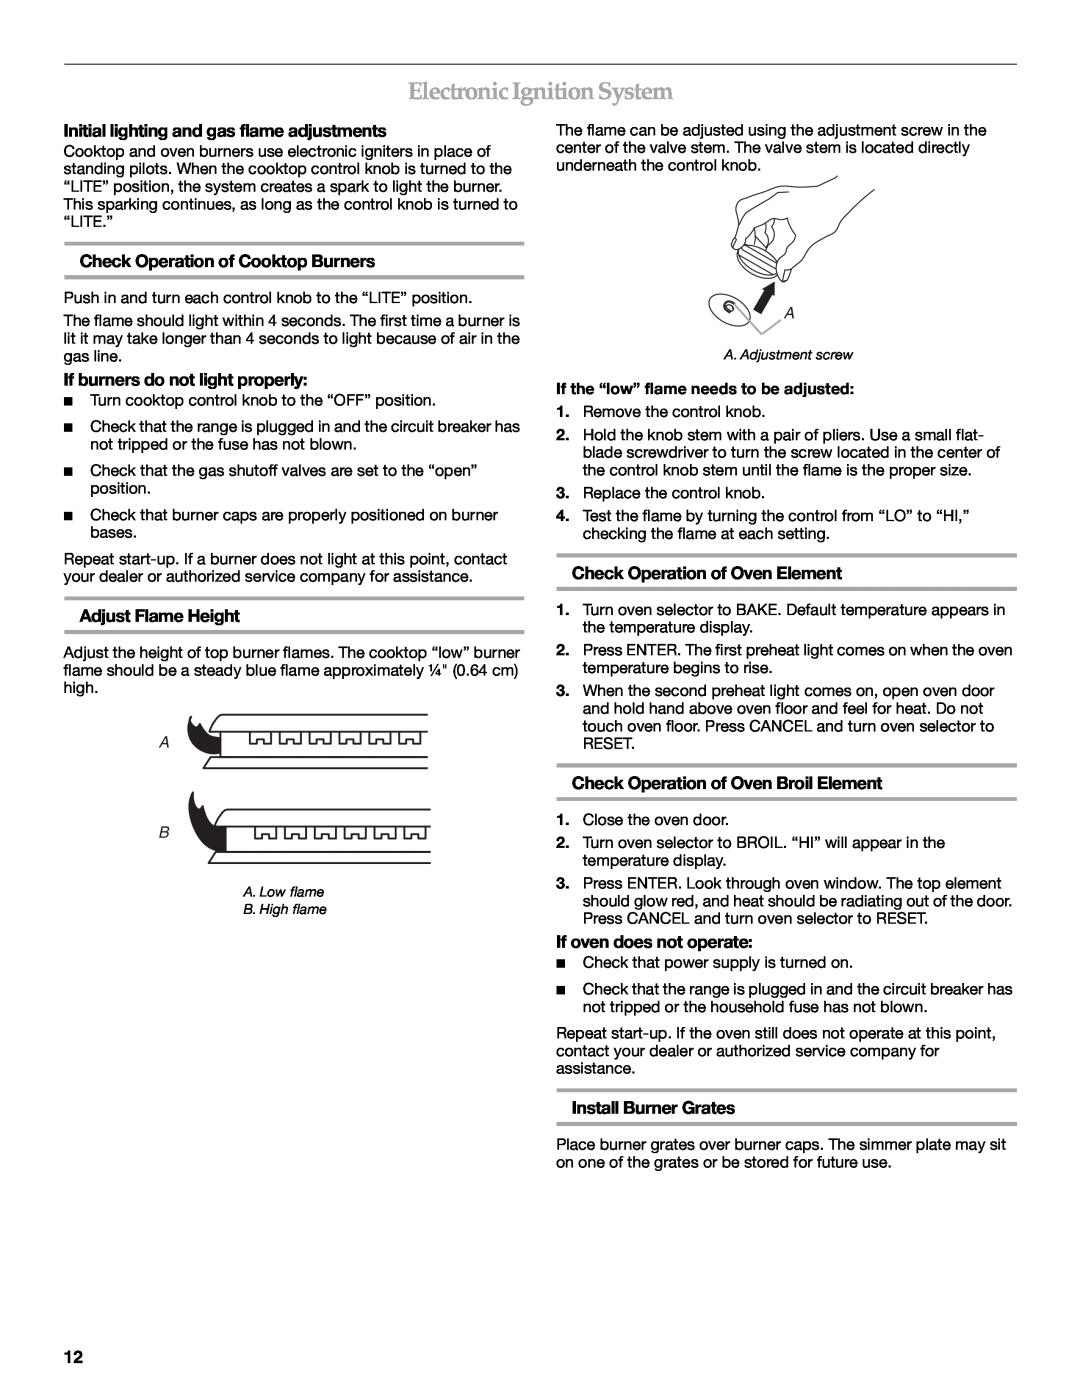 KitchenAid 9759121A Electronic Ignition System, Initial lighting and gas flame adjustments, Adjust Flame Height 